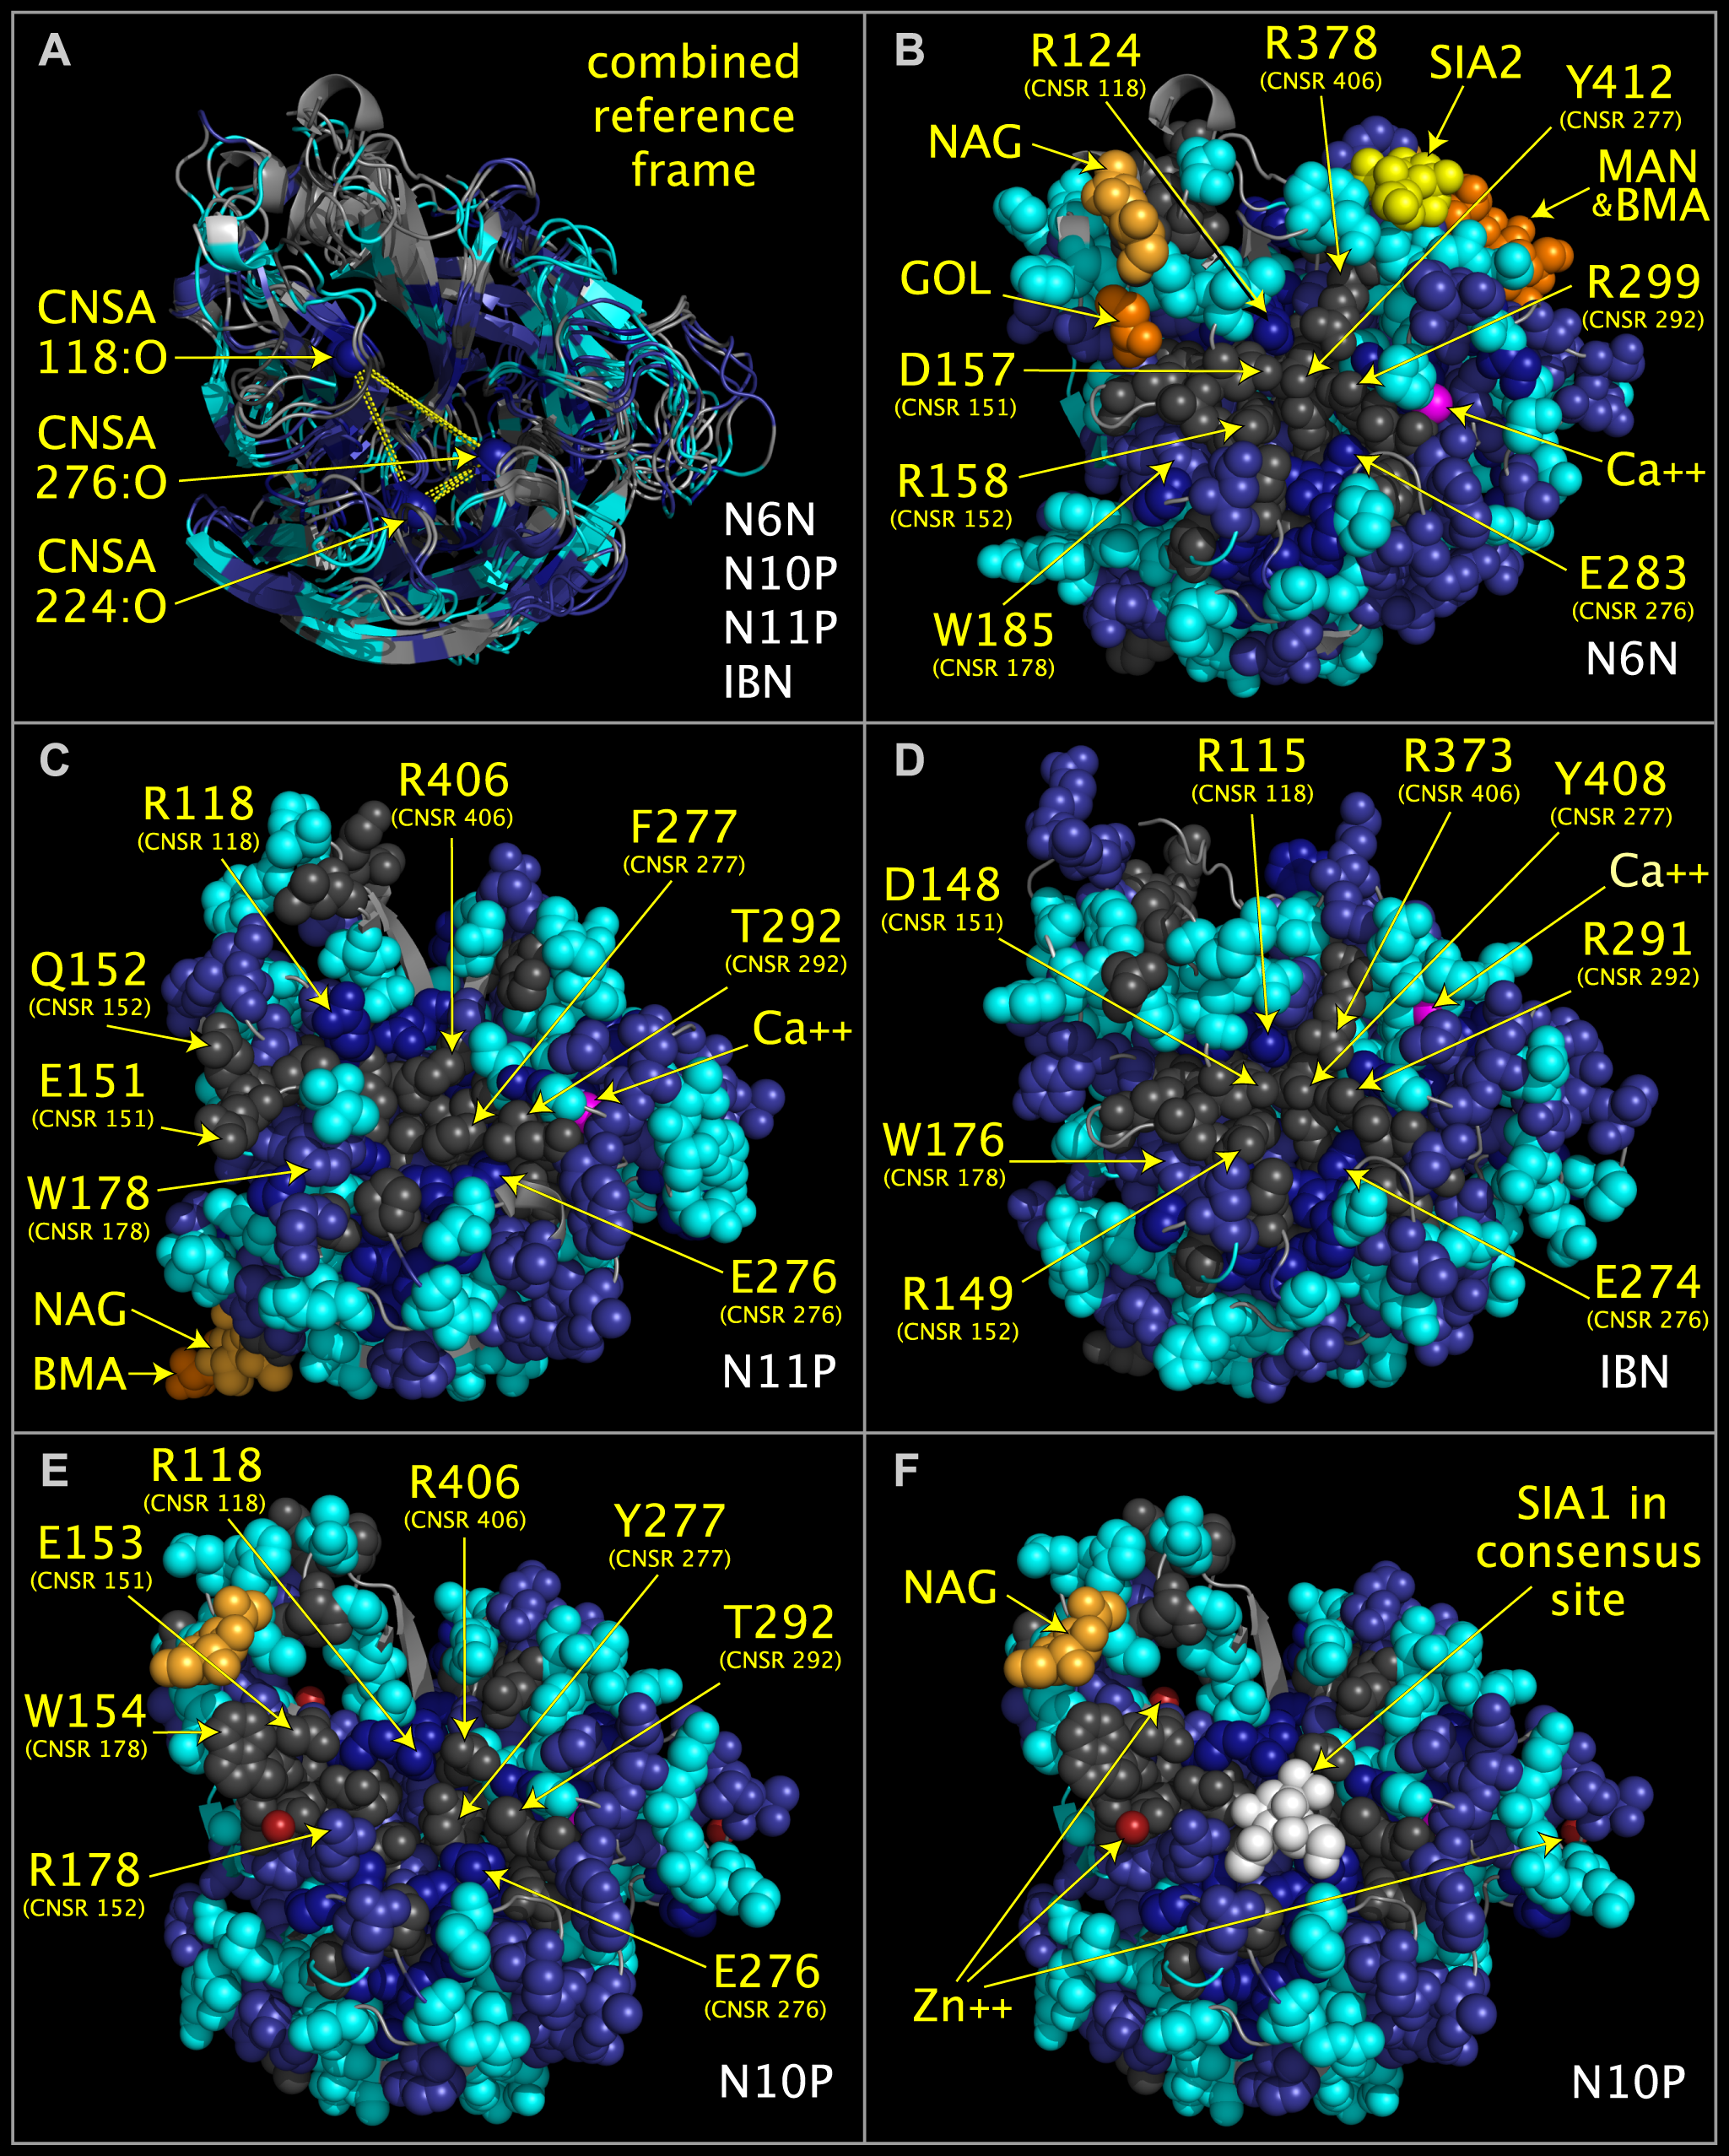 Consensus active site components of N6N, N10P, N11P, and IBN.